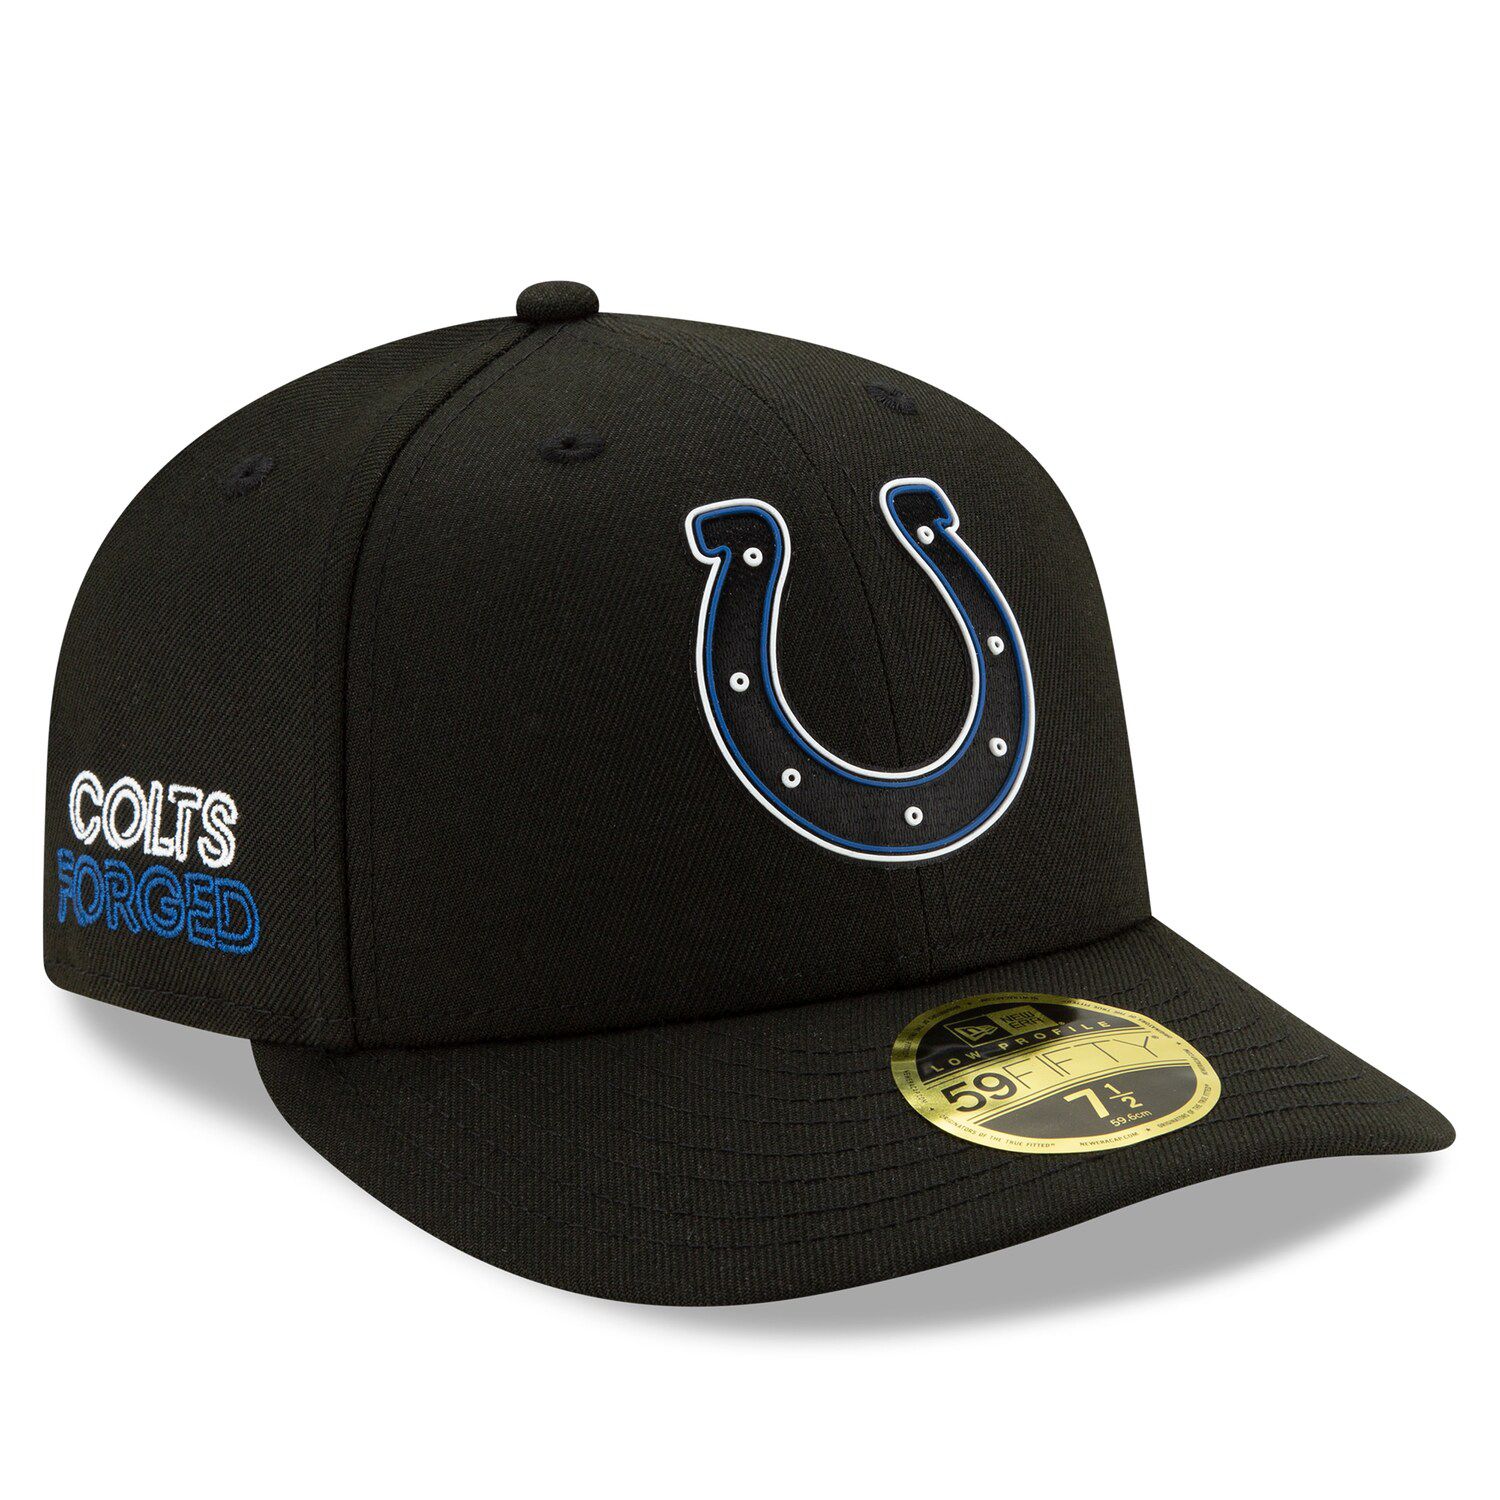 indianapolis colts fitted hat